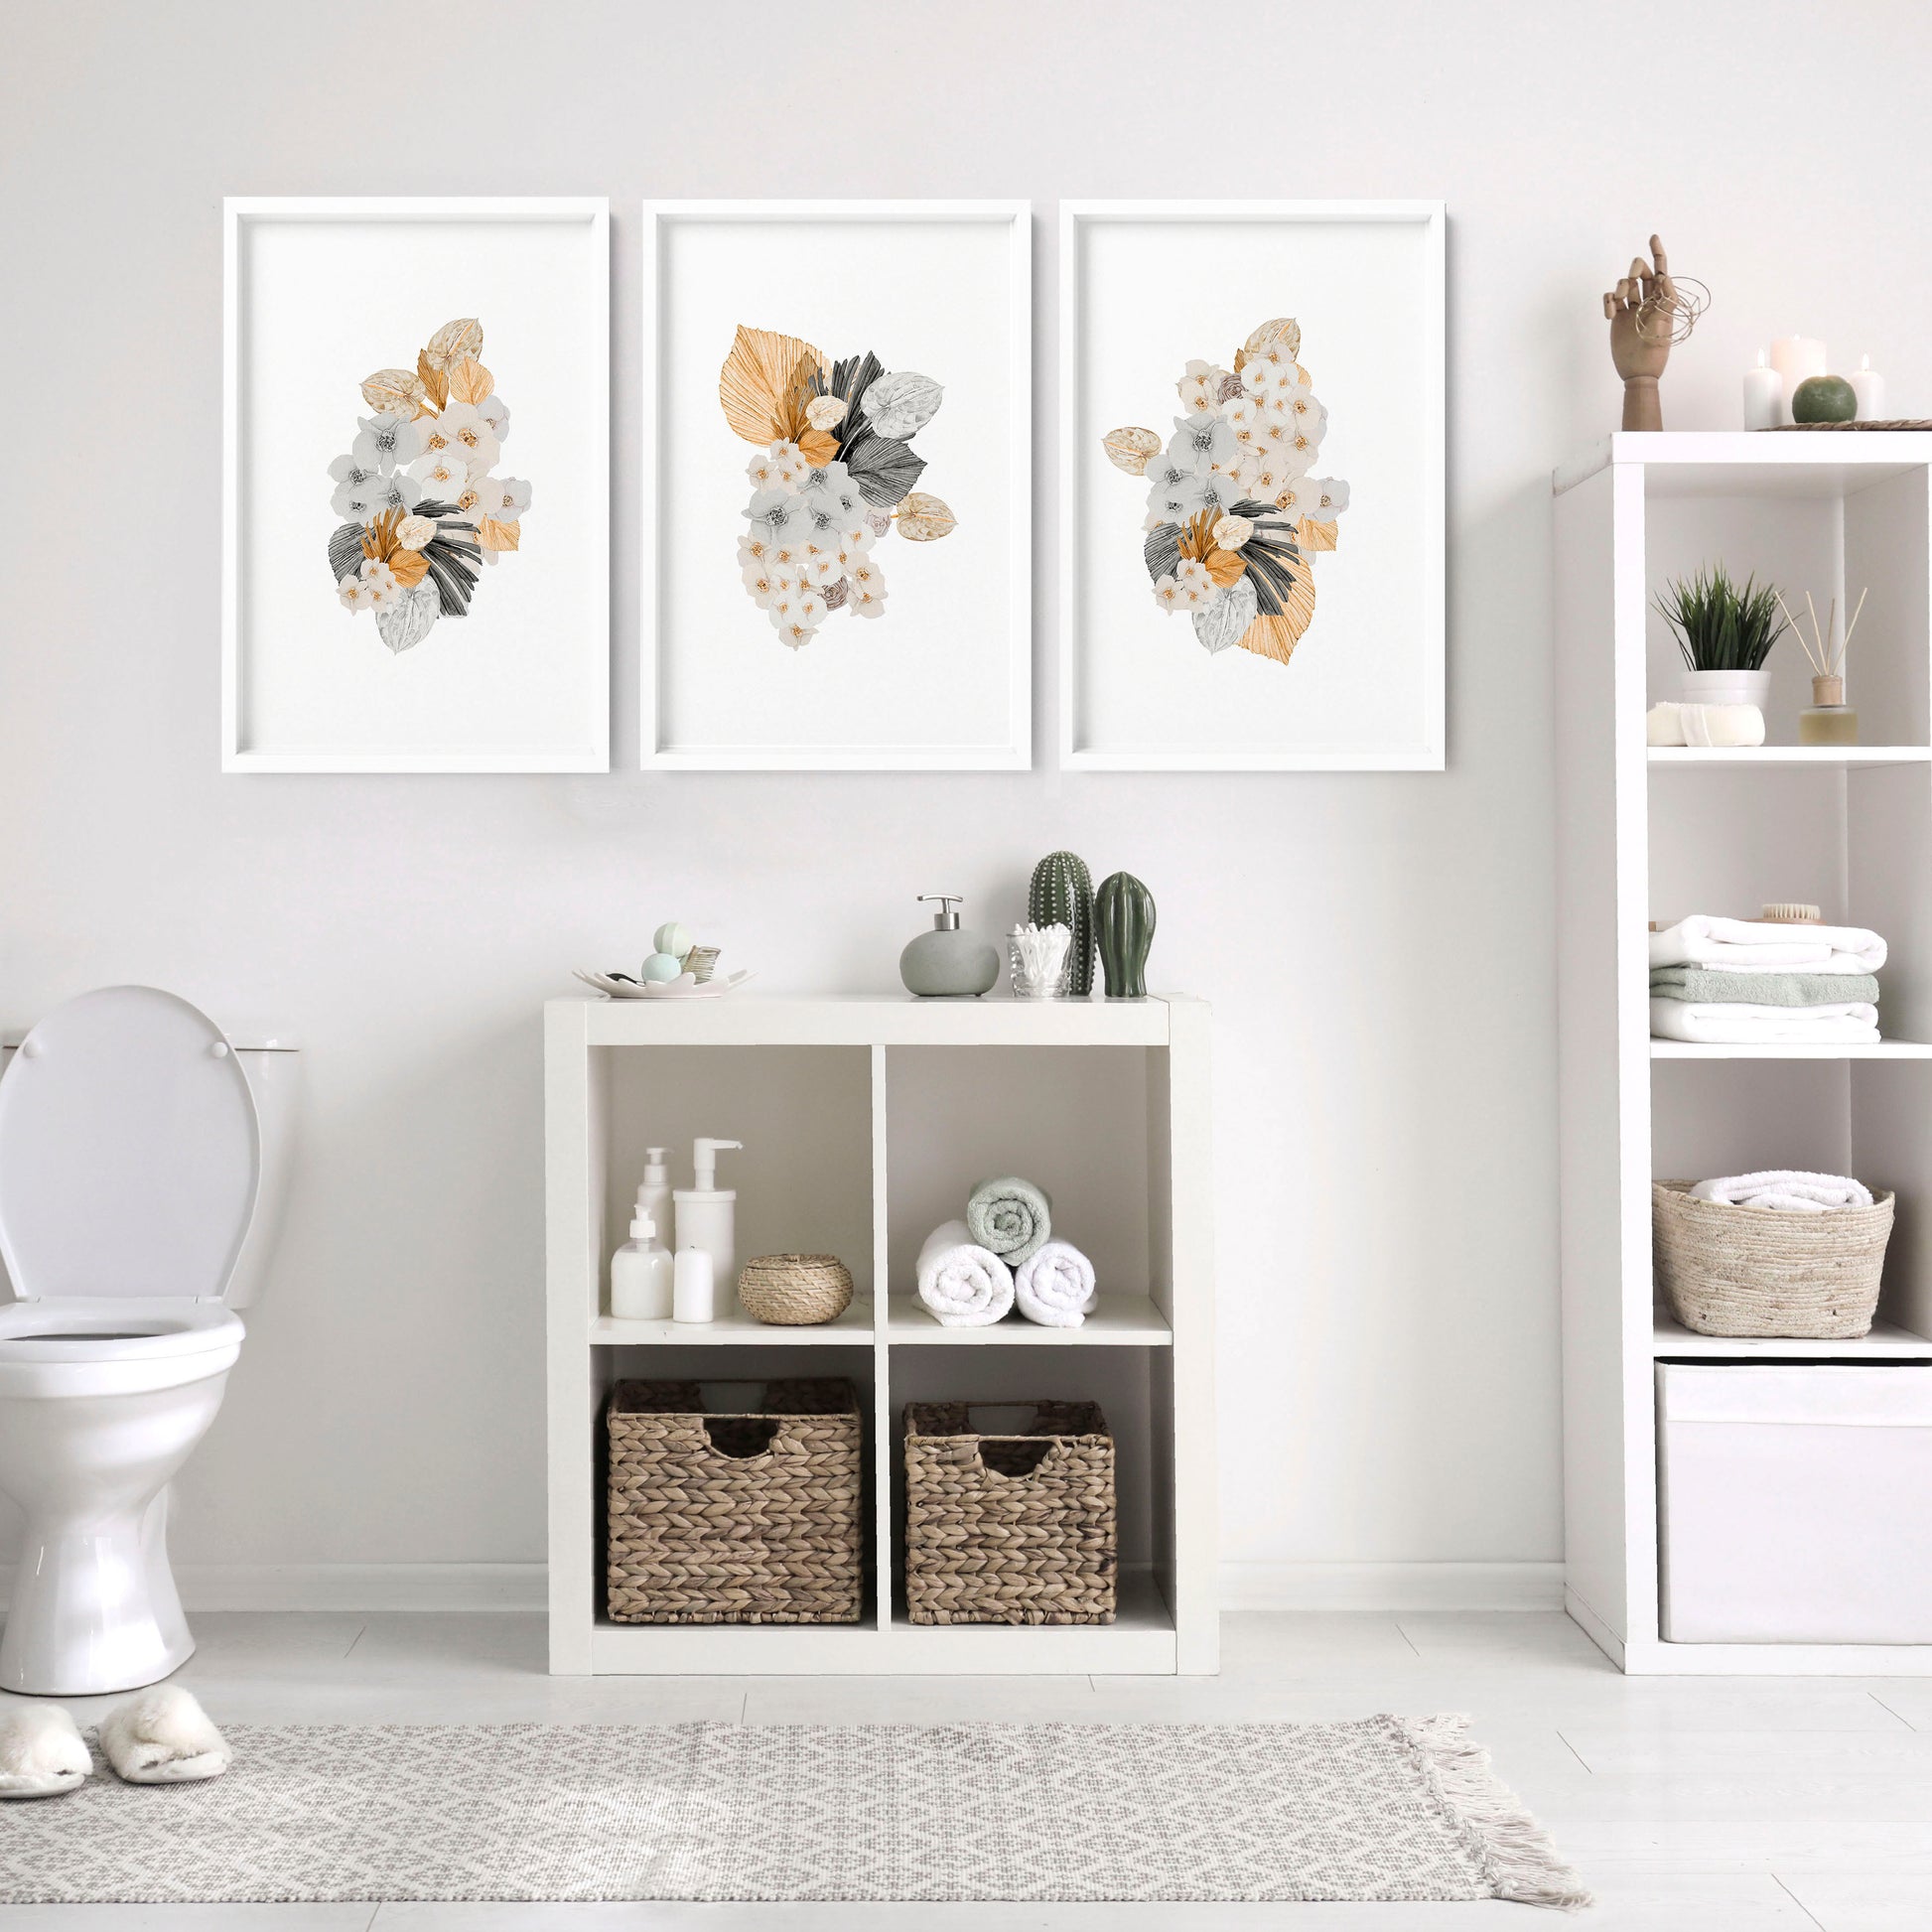 Bathroom decorations for walls | Set of 3 Shabby Chic wall art